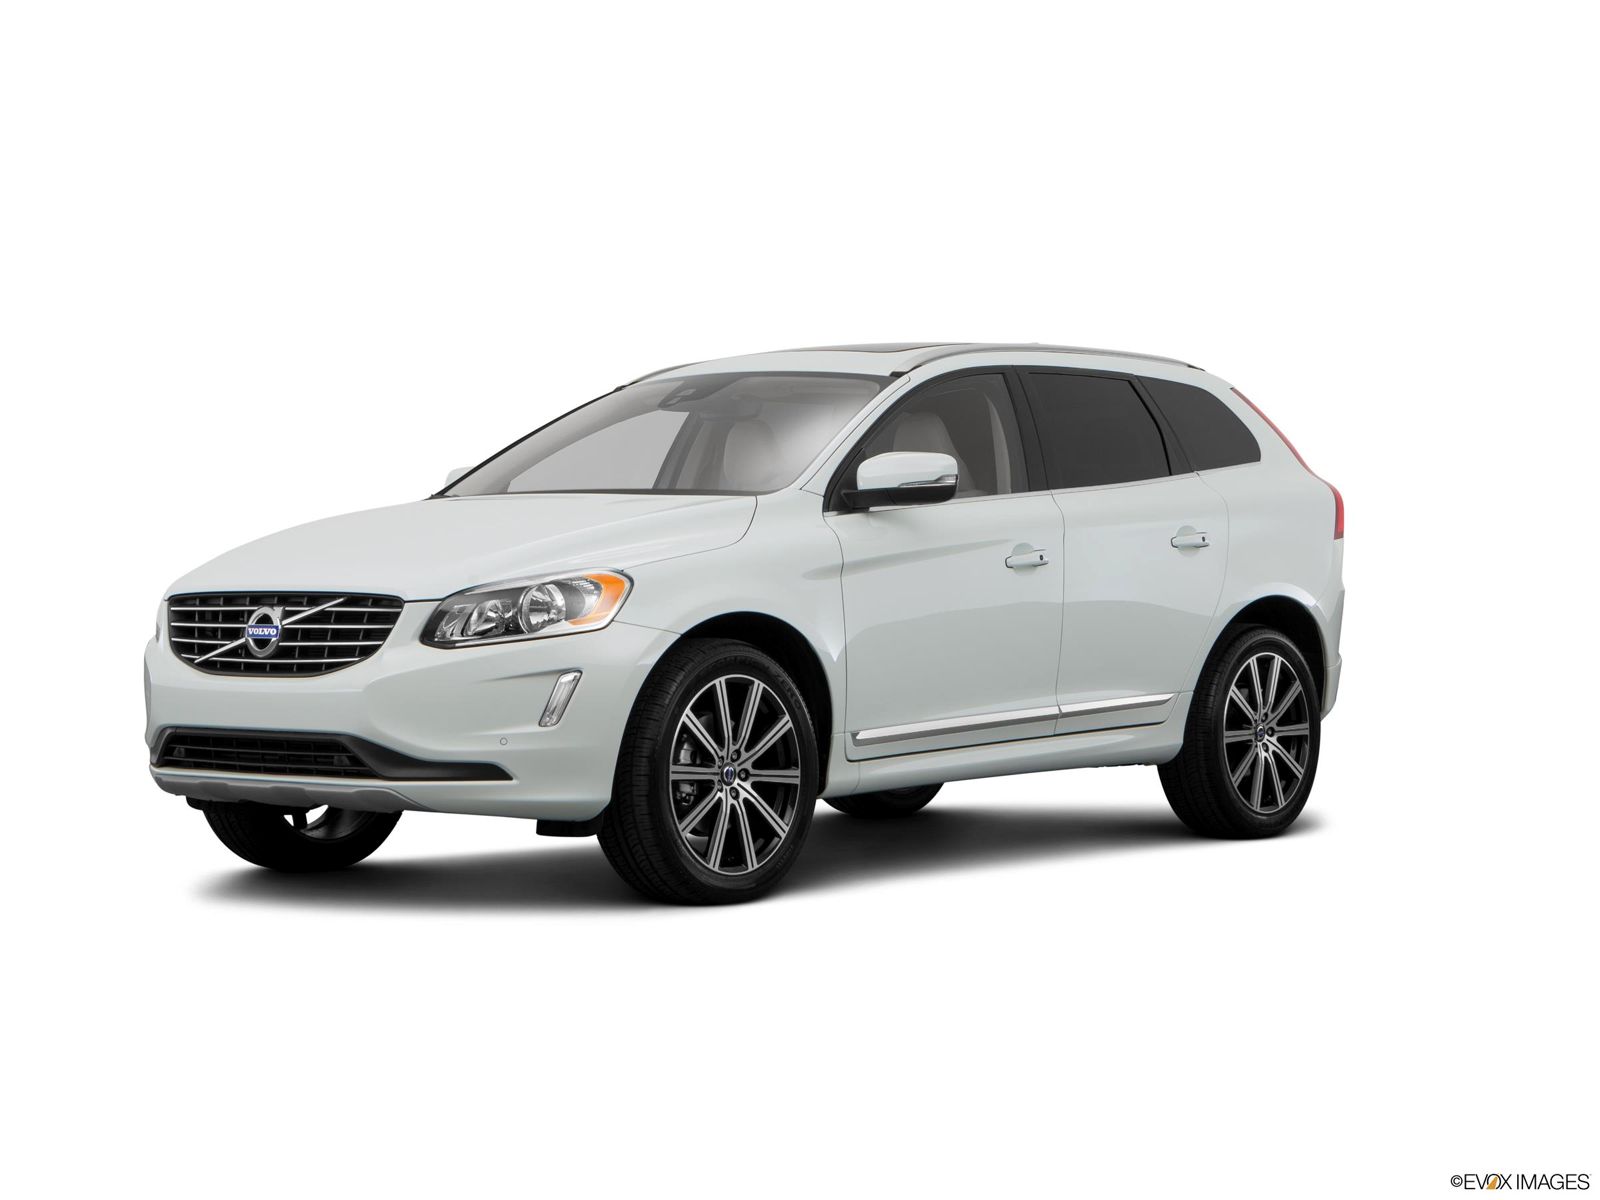 2016 Volvo XC60 Research, photos, specs, and expertise | CarMax